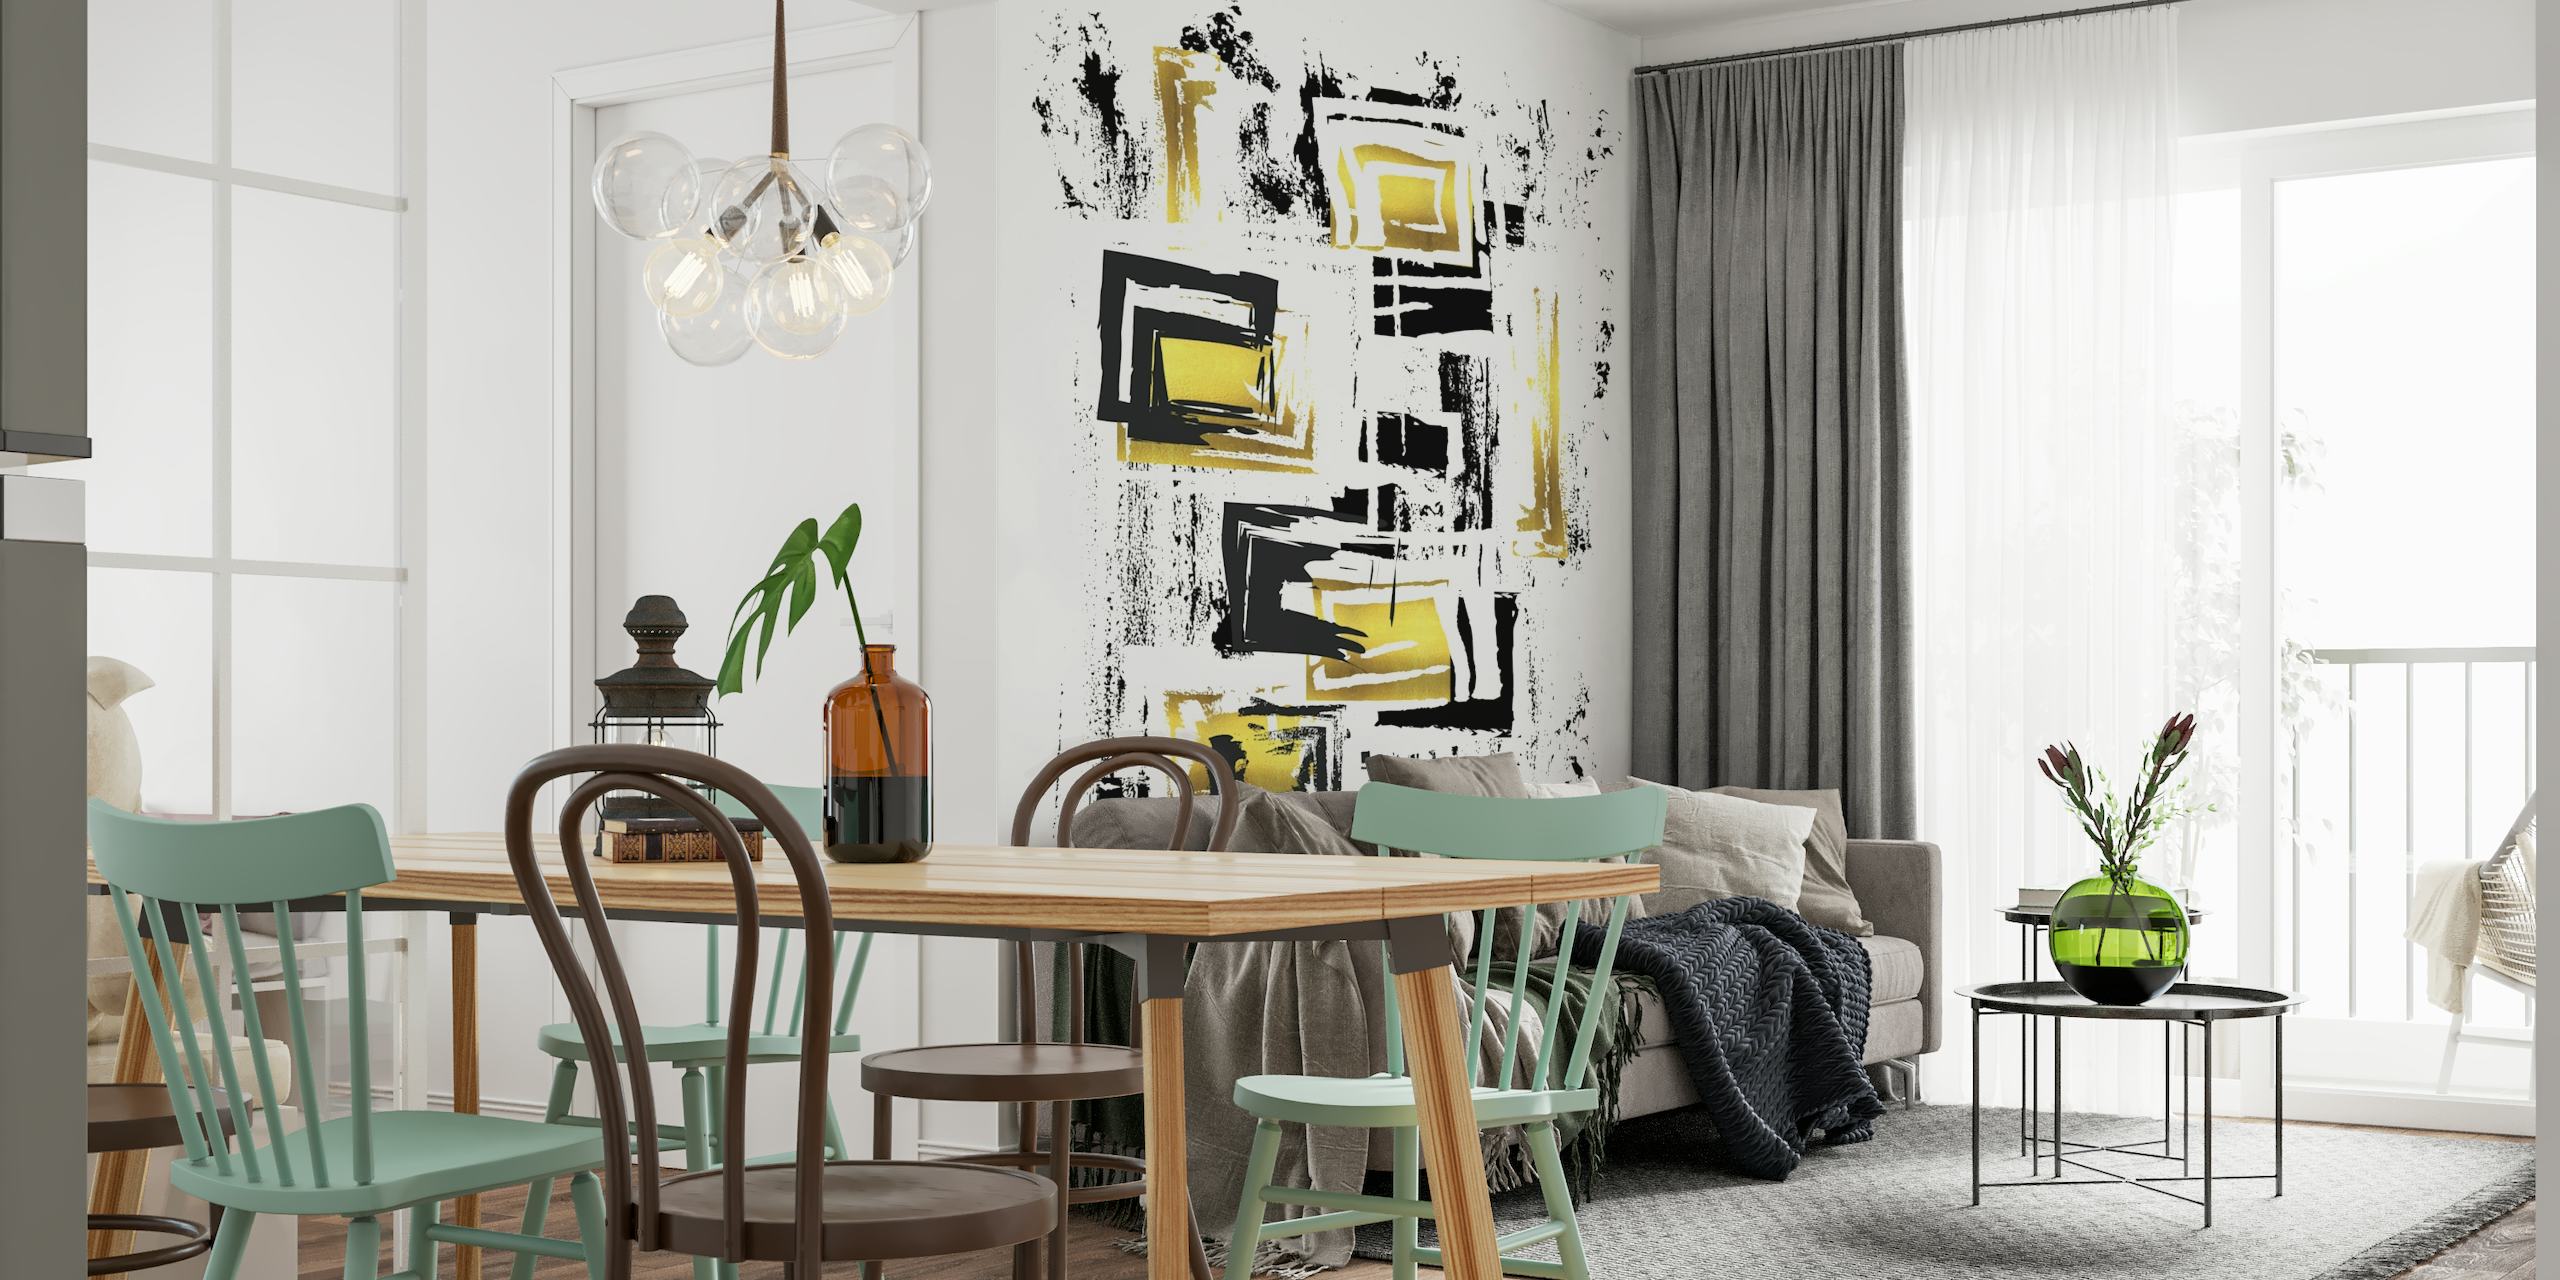 Abstract black and white wall mural with gold accents in square patterns